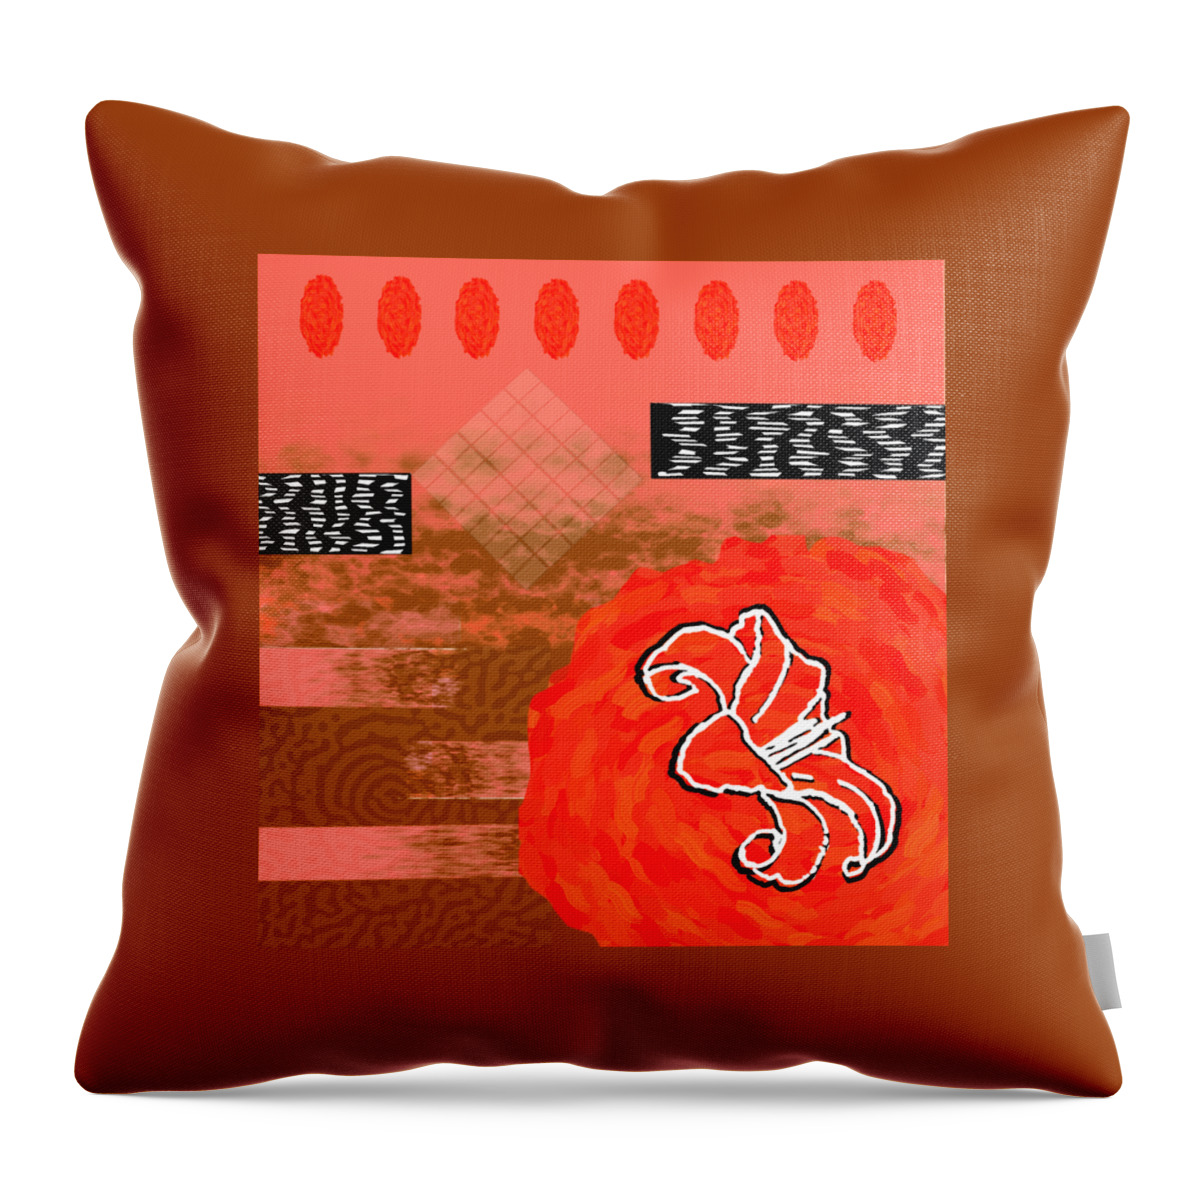 Red Throw Pillow featuring the digital art Red Peach Motif Collage Design for Home Decor by Delynn Addams